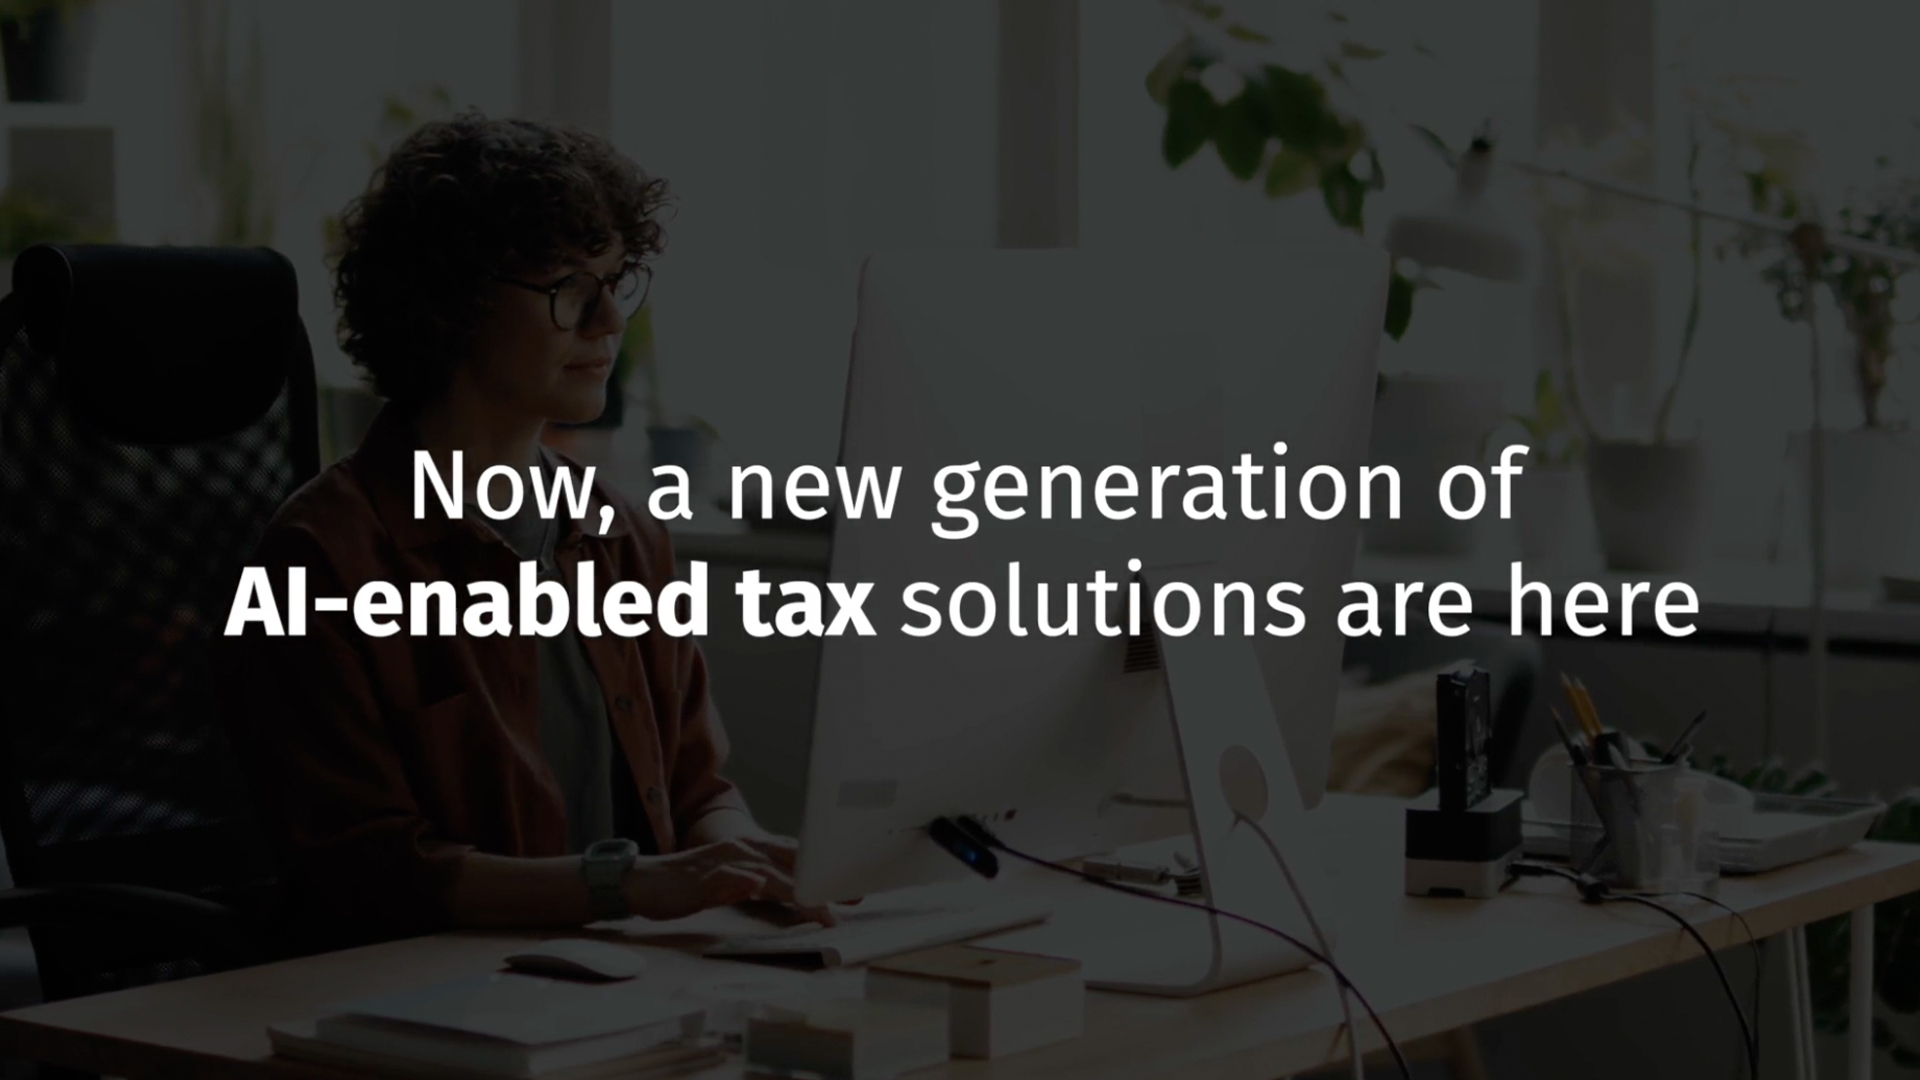 Now, a new generation of AI-enabled tax solutions are here